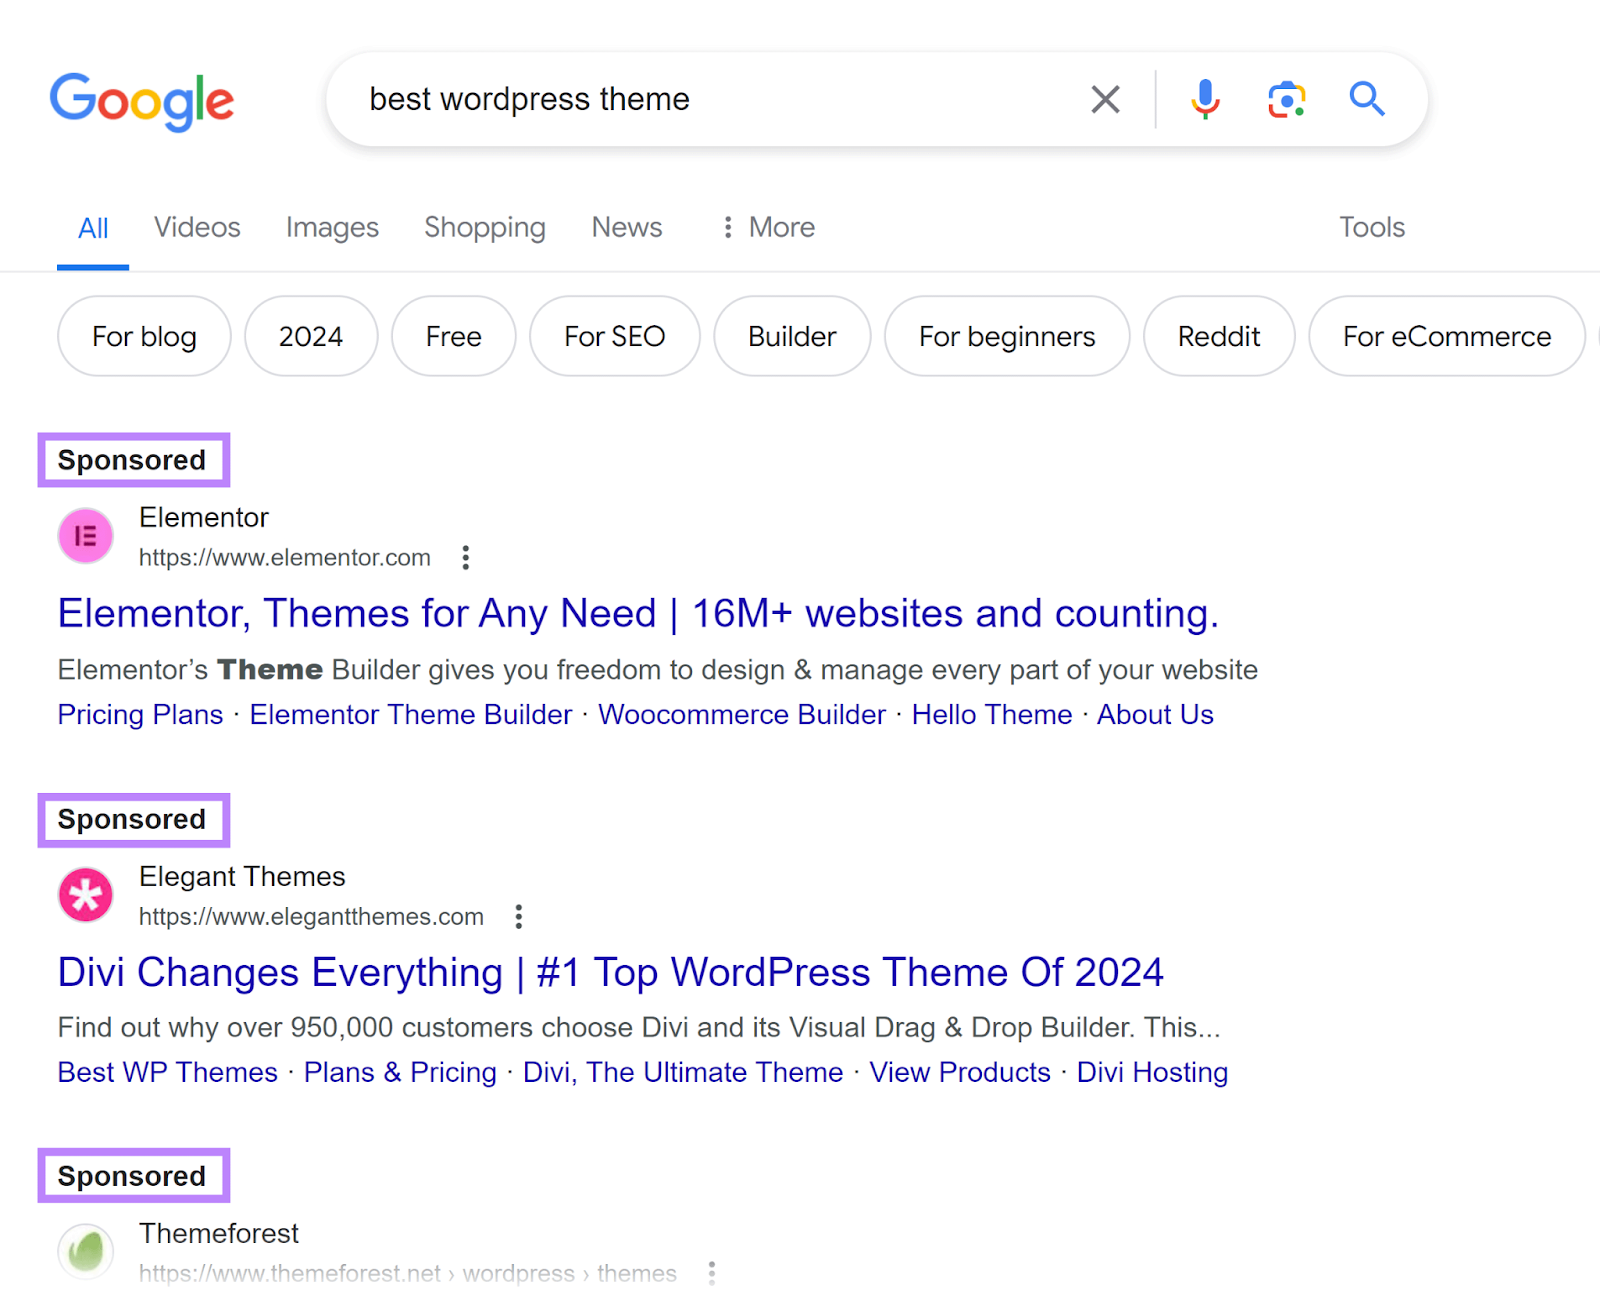 Sponsored search results on Google